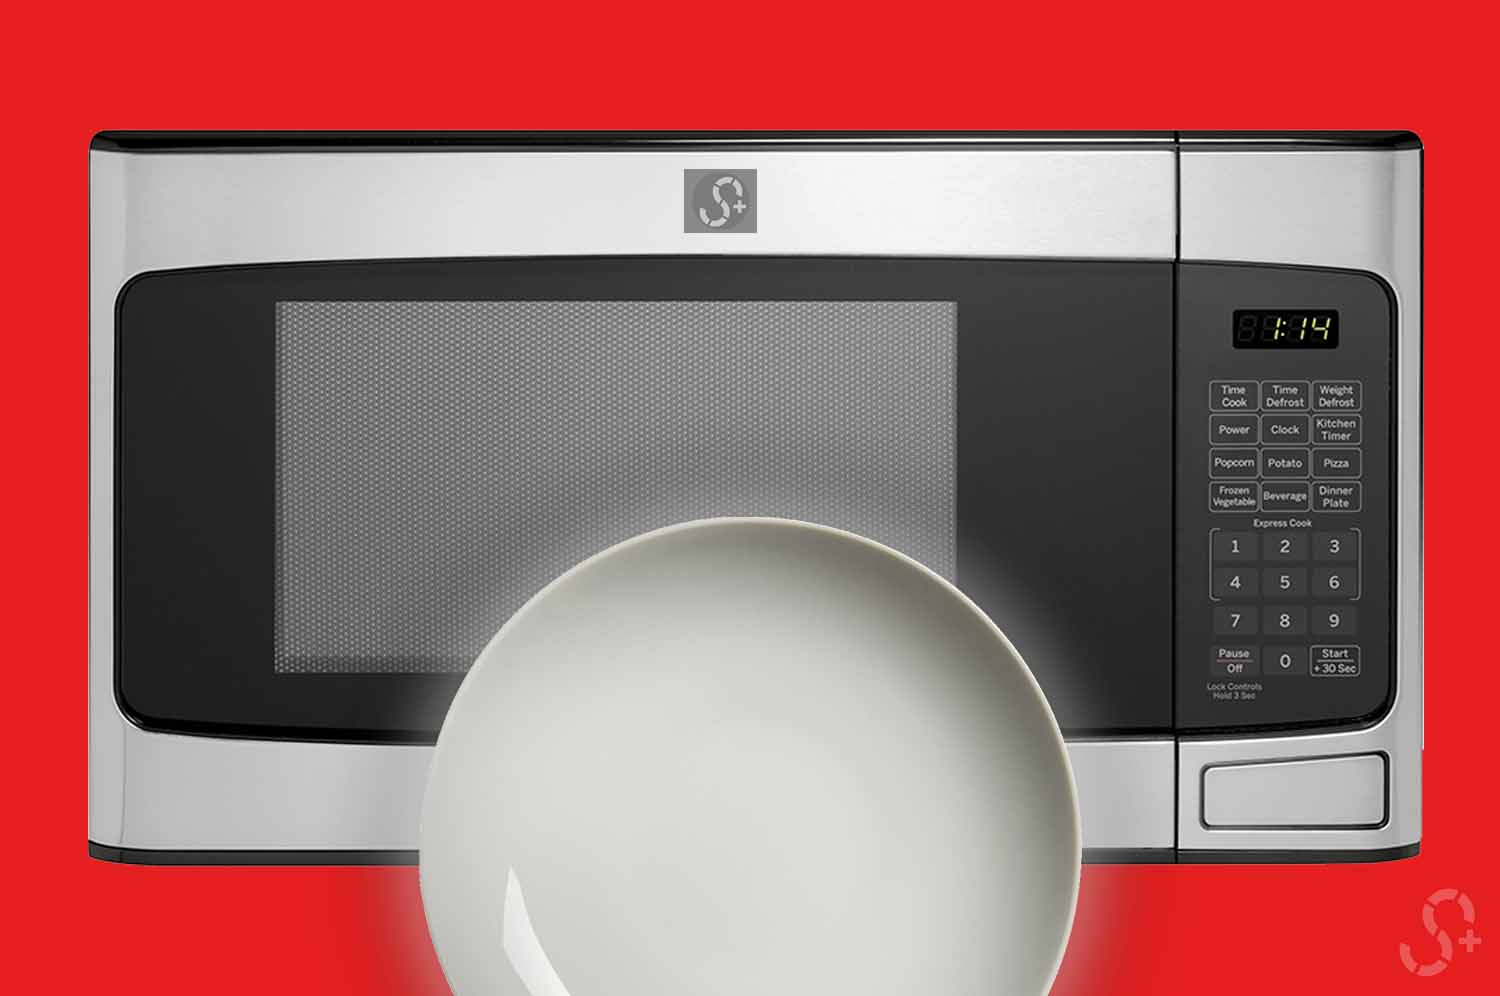 Porcelain along with Microwave in front red background